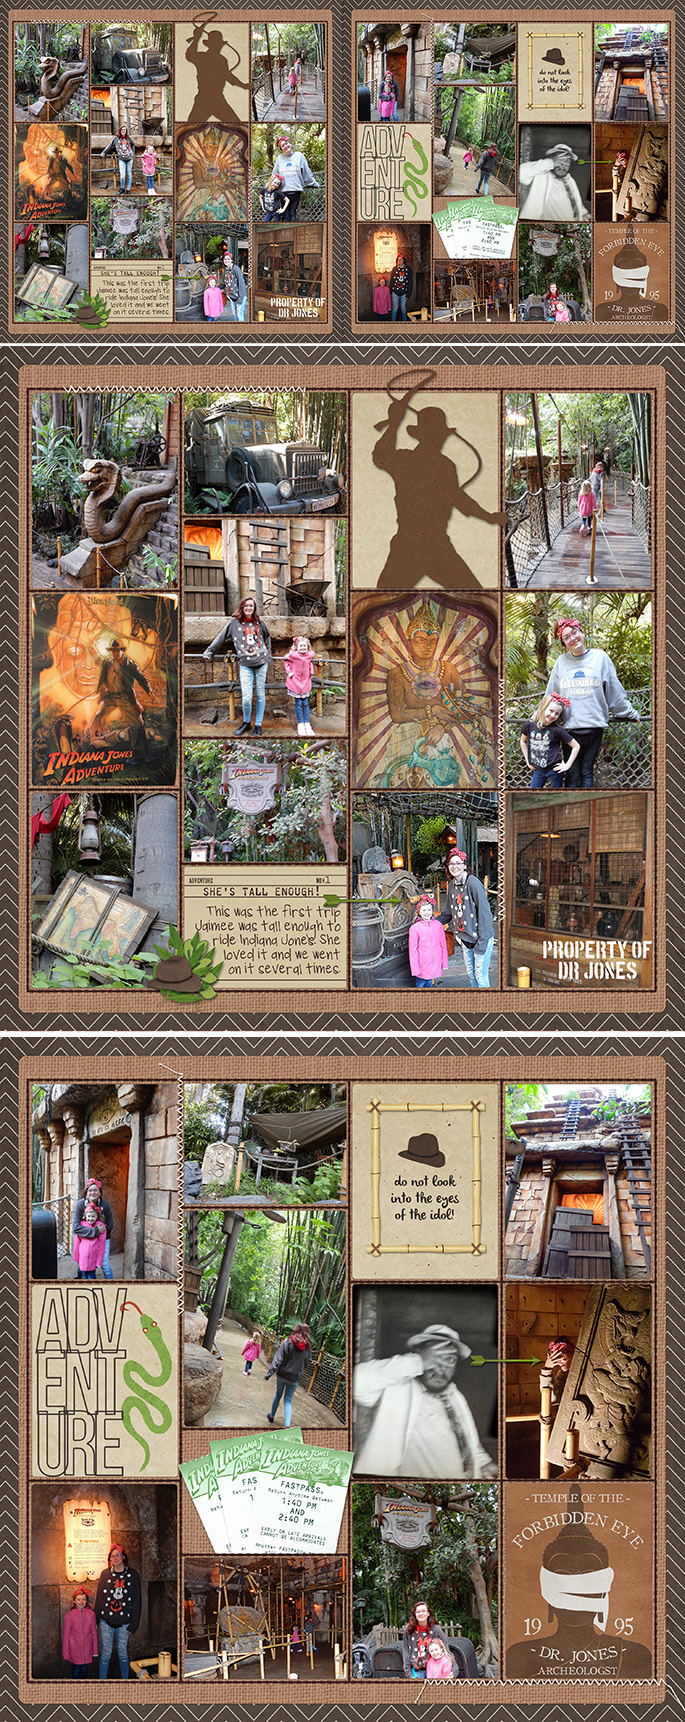 Adventureland Indiana Jones | A Disney Project Mouse Story - A Photo Book from Kathleen Summers - Sahlin Studio Project Mouse